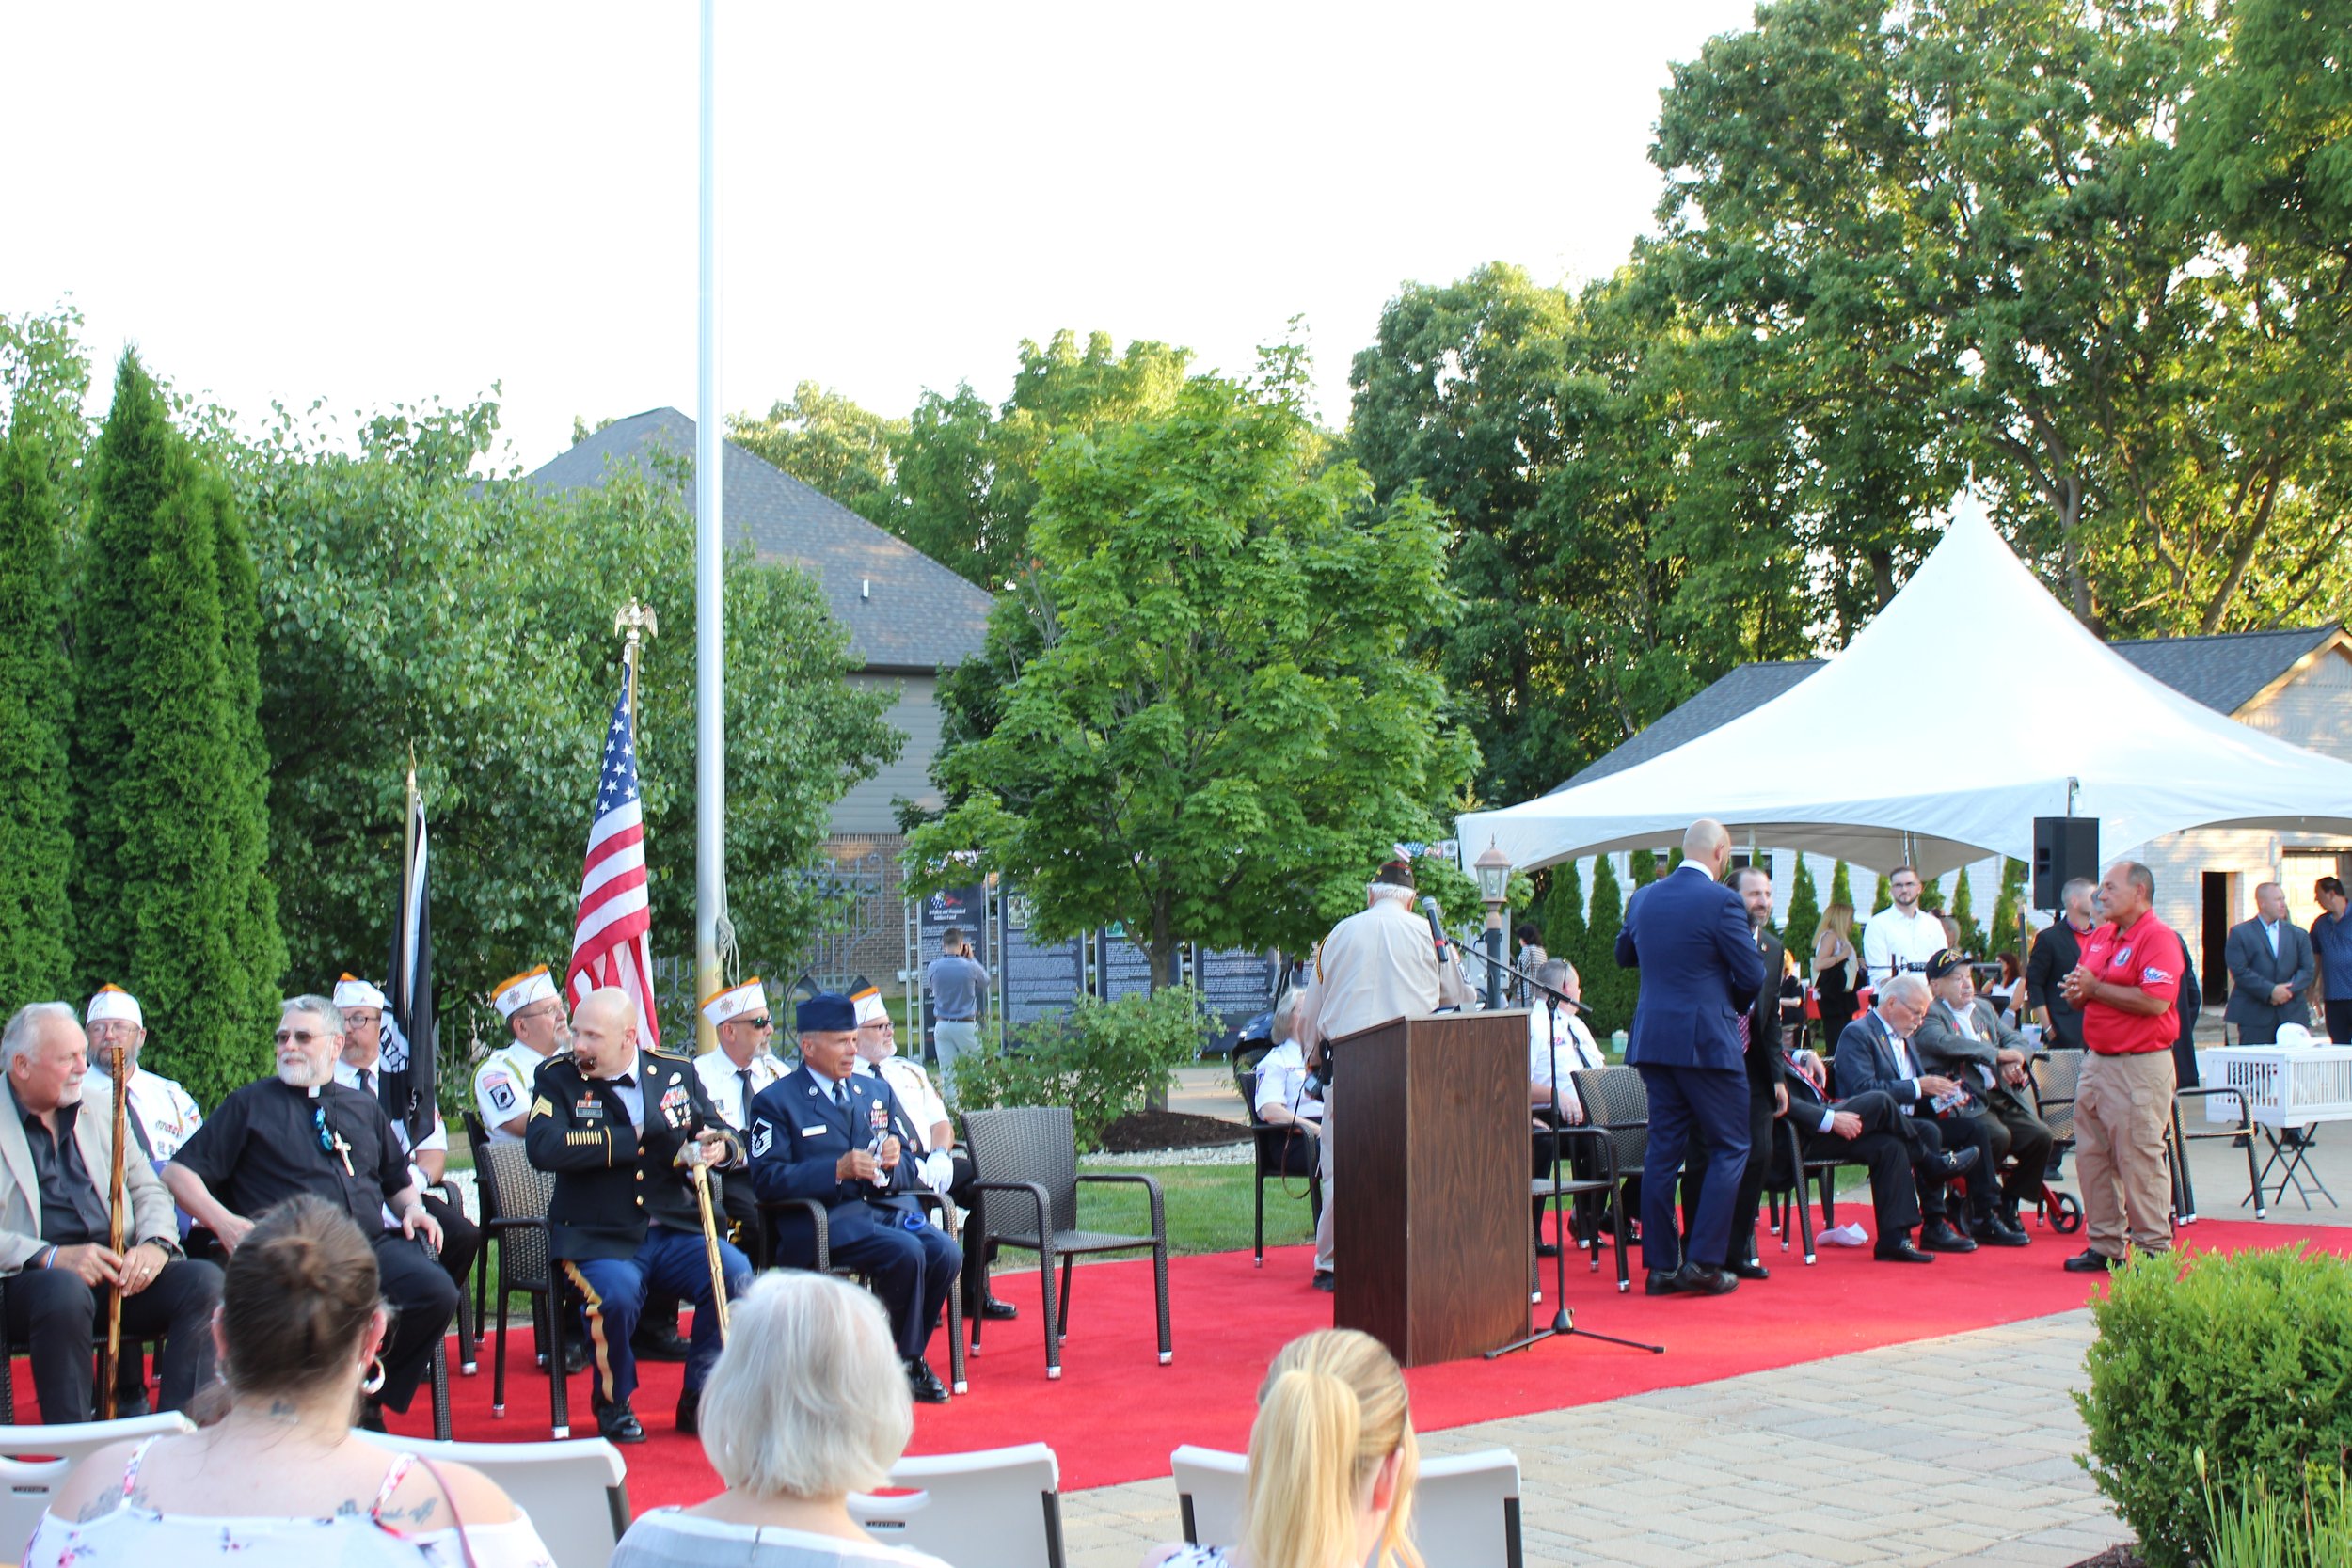  The event featured a veteran changing the flag. 